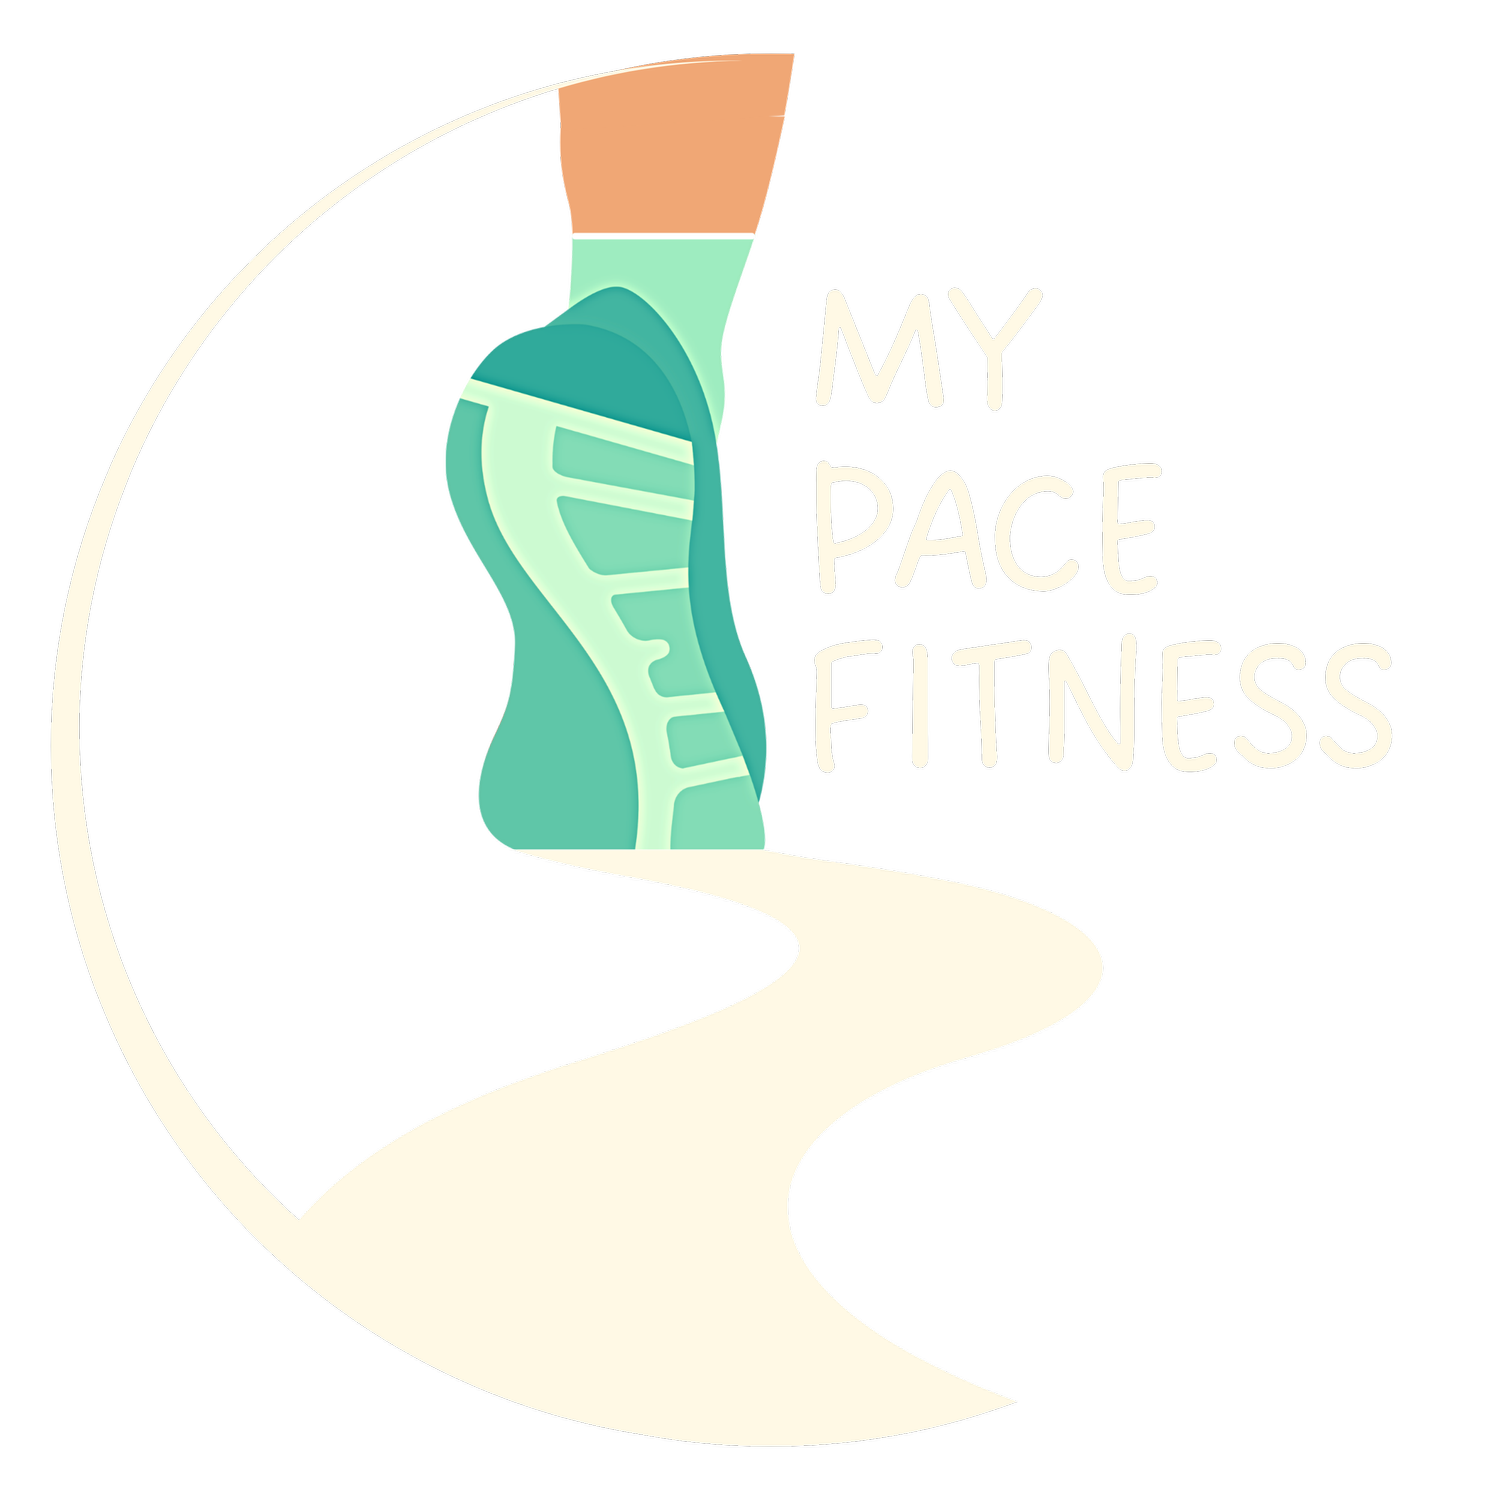 My Pace Fitness